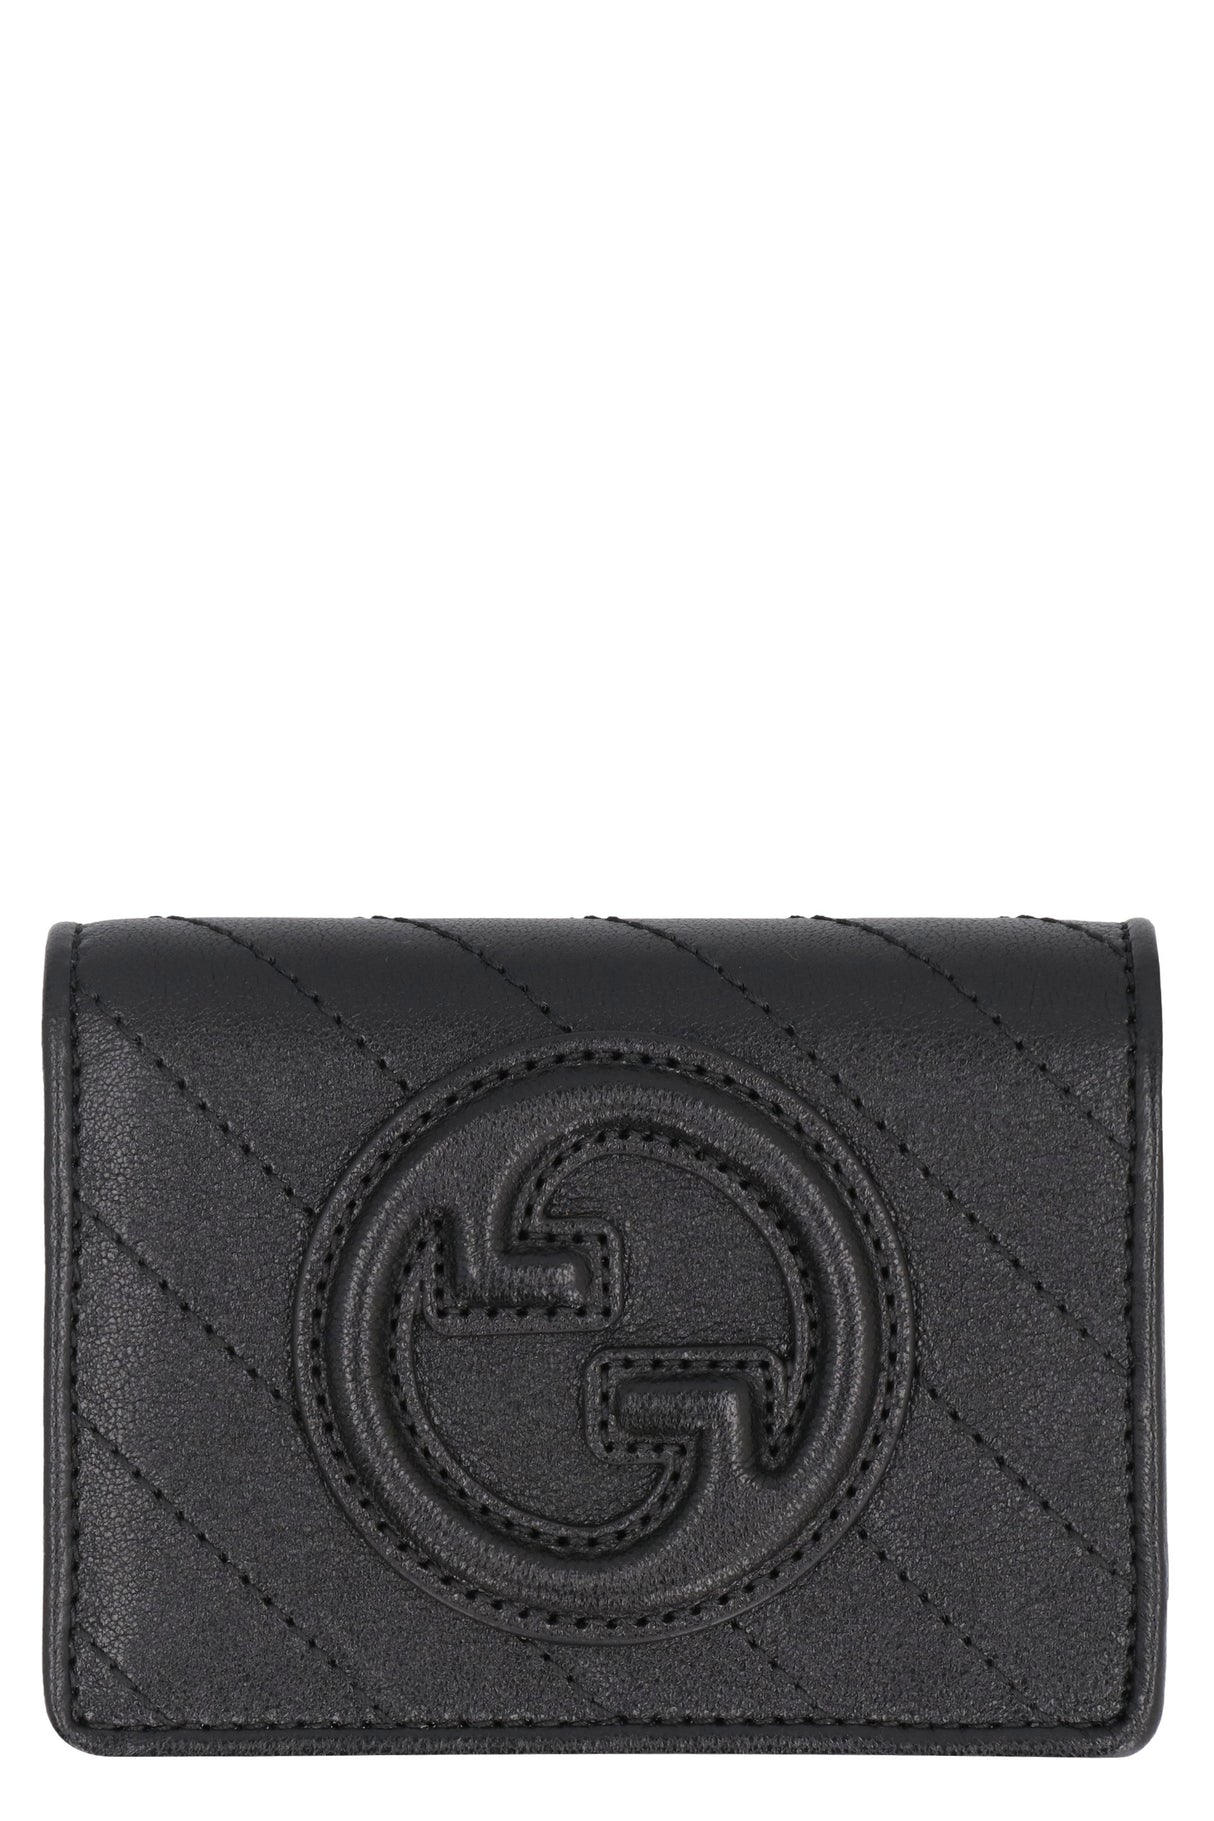 Glowing Black Leather Card Holder - Women's Must-Have Accessory